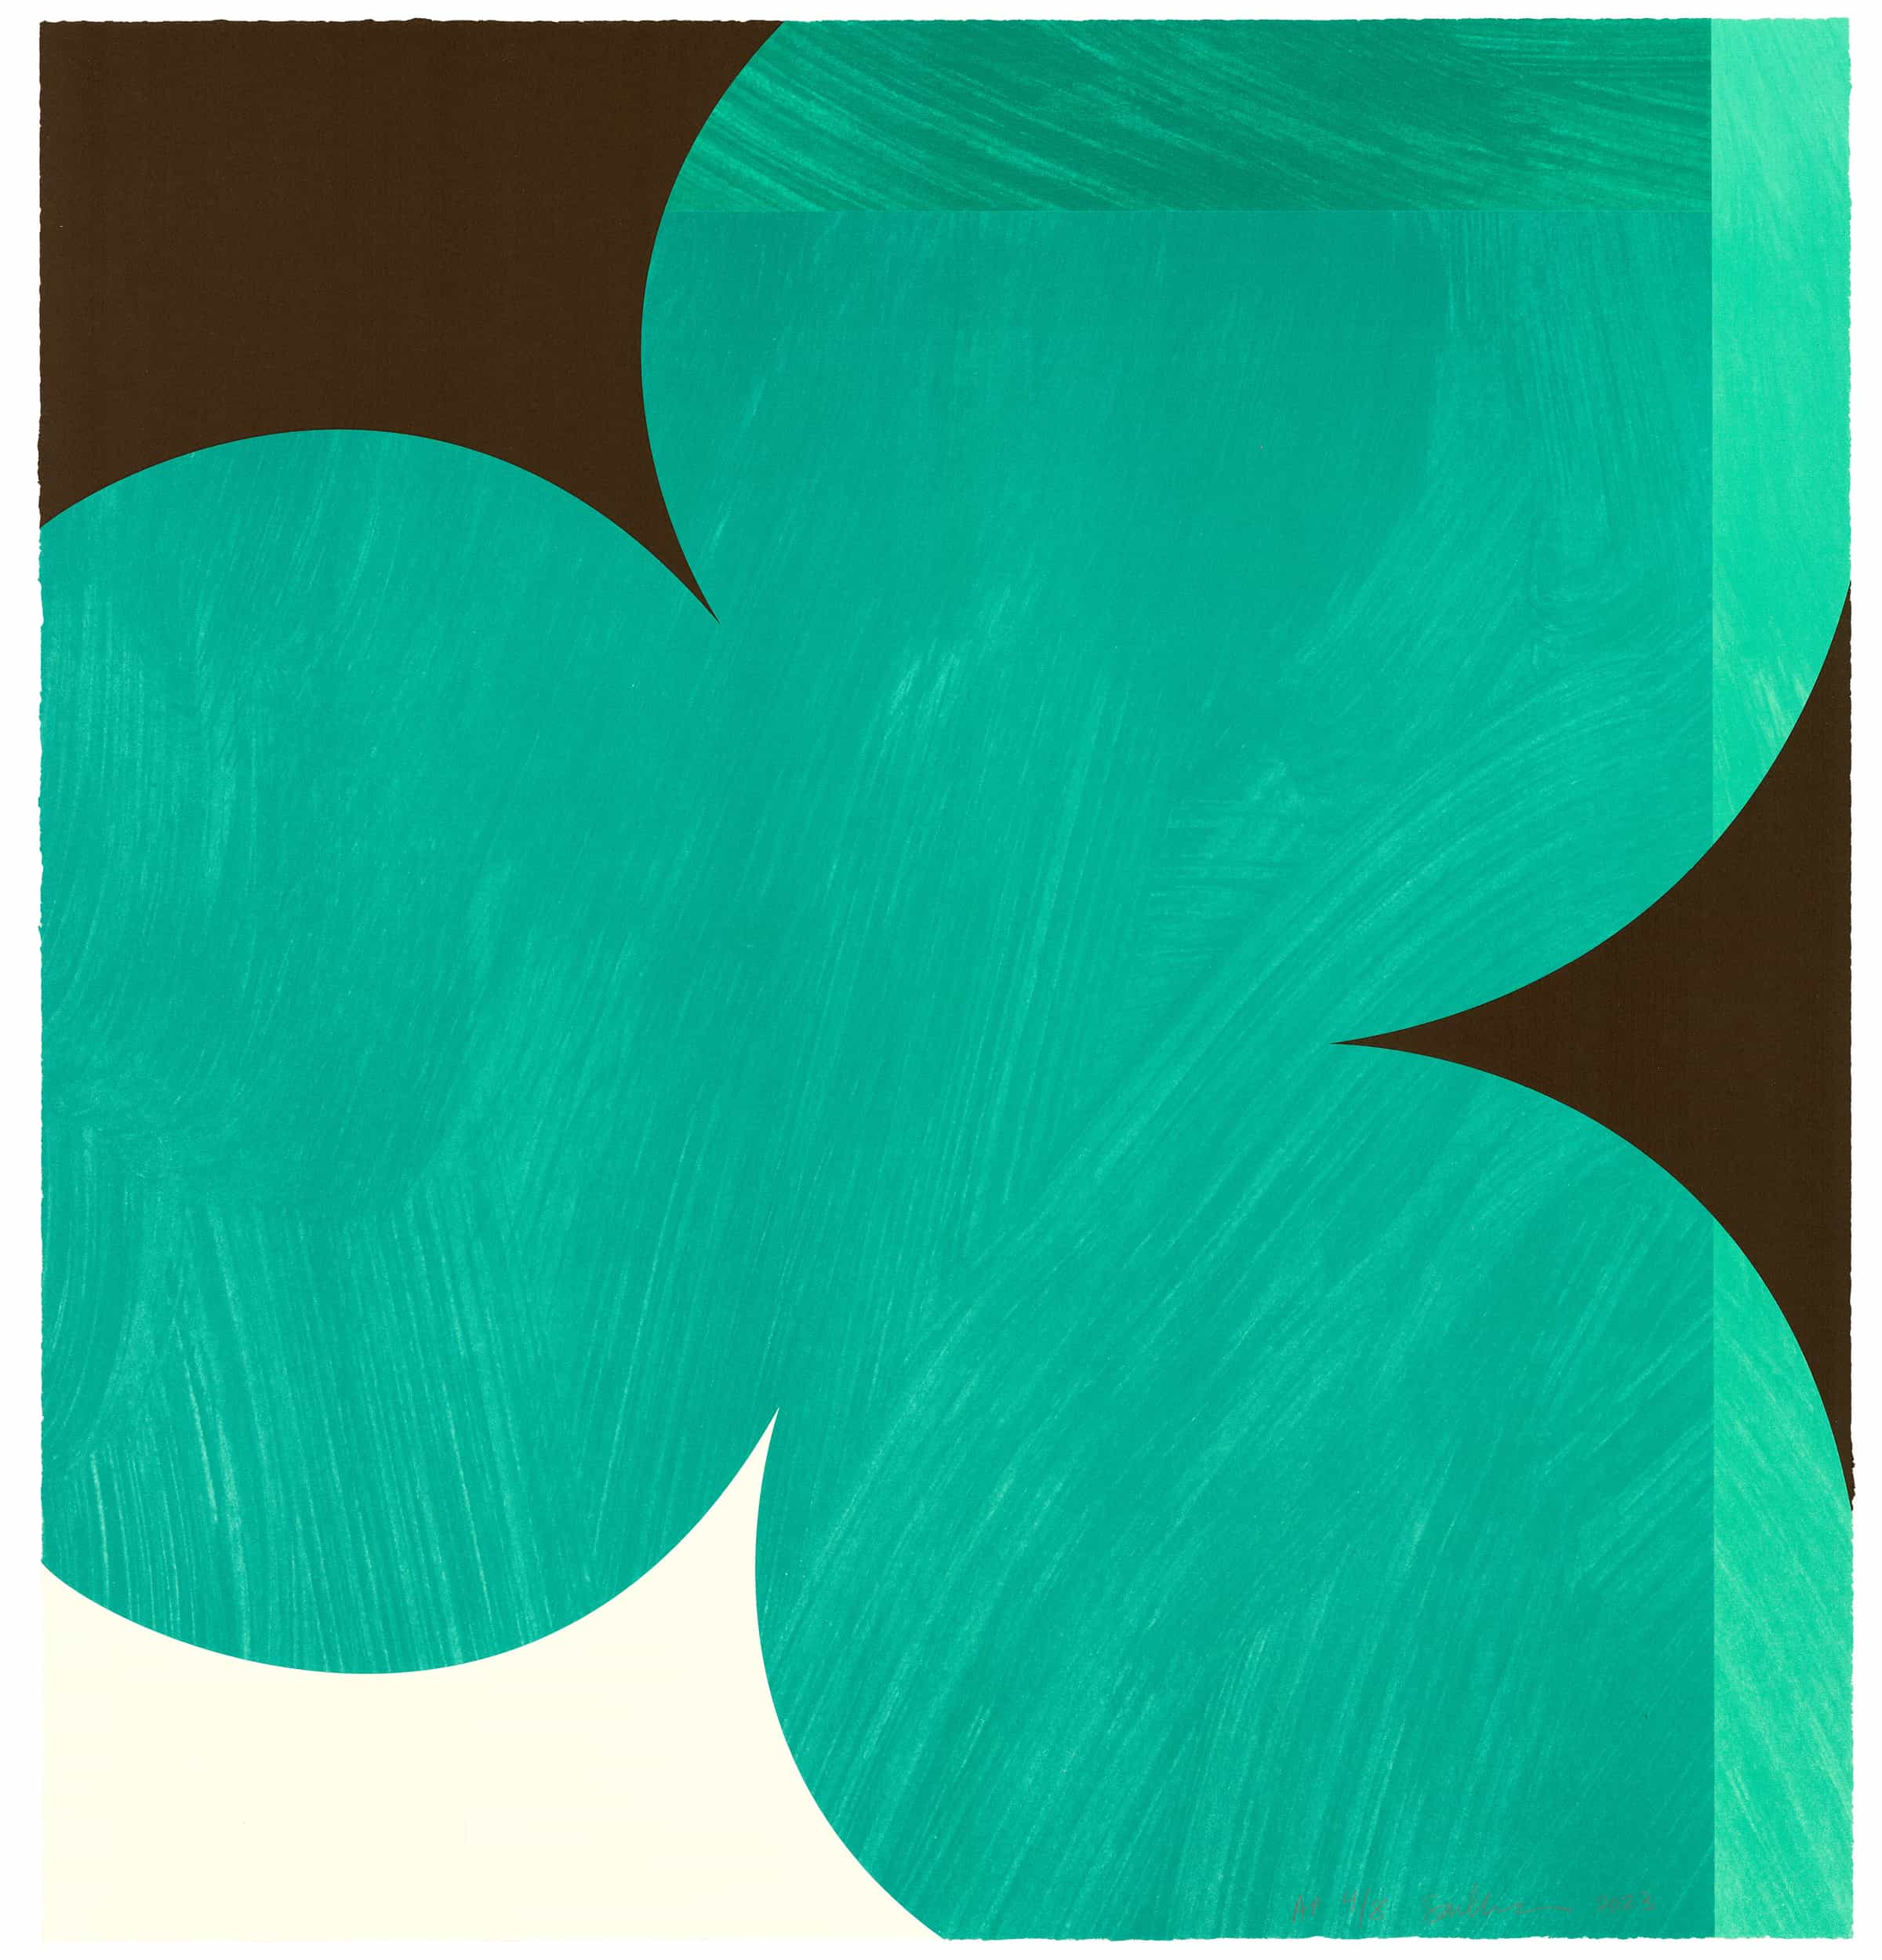 Sarah Crowner, Untitled (Green Clovers), 2023